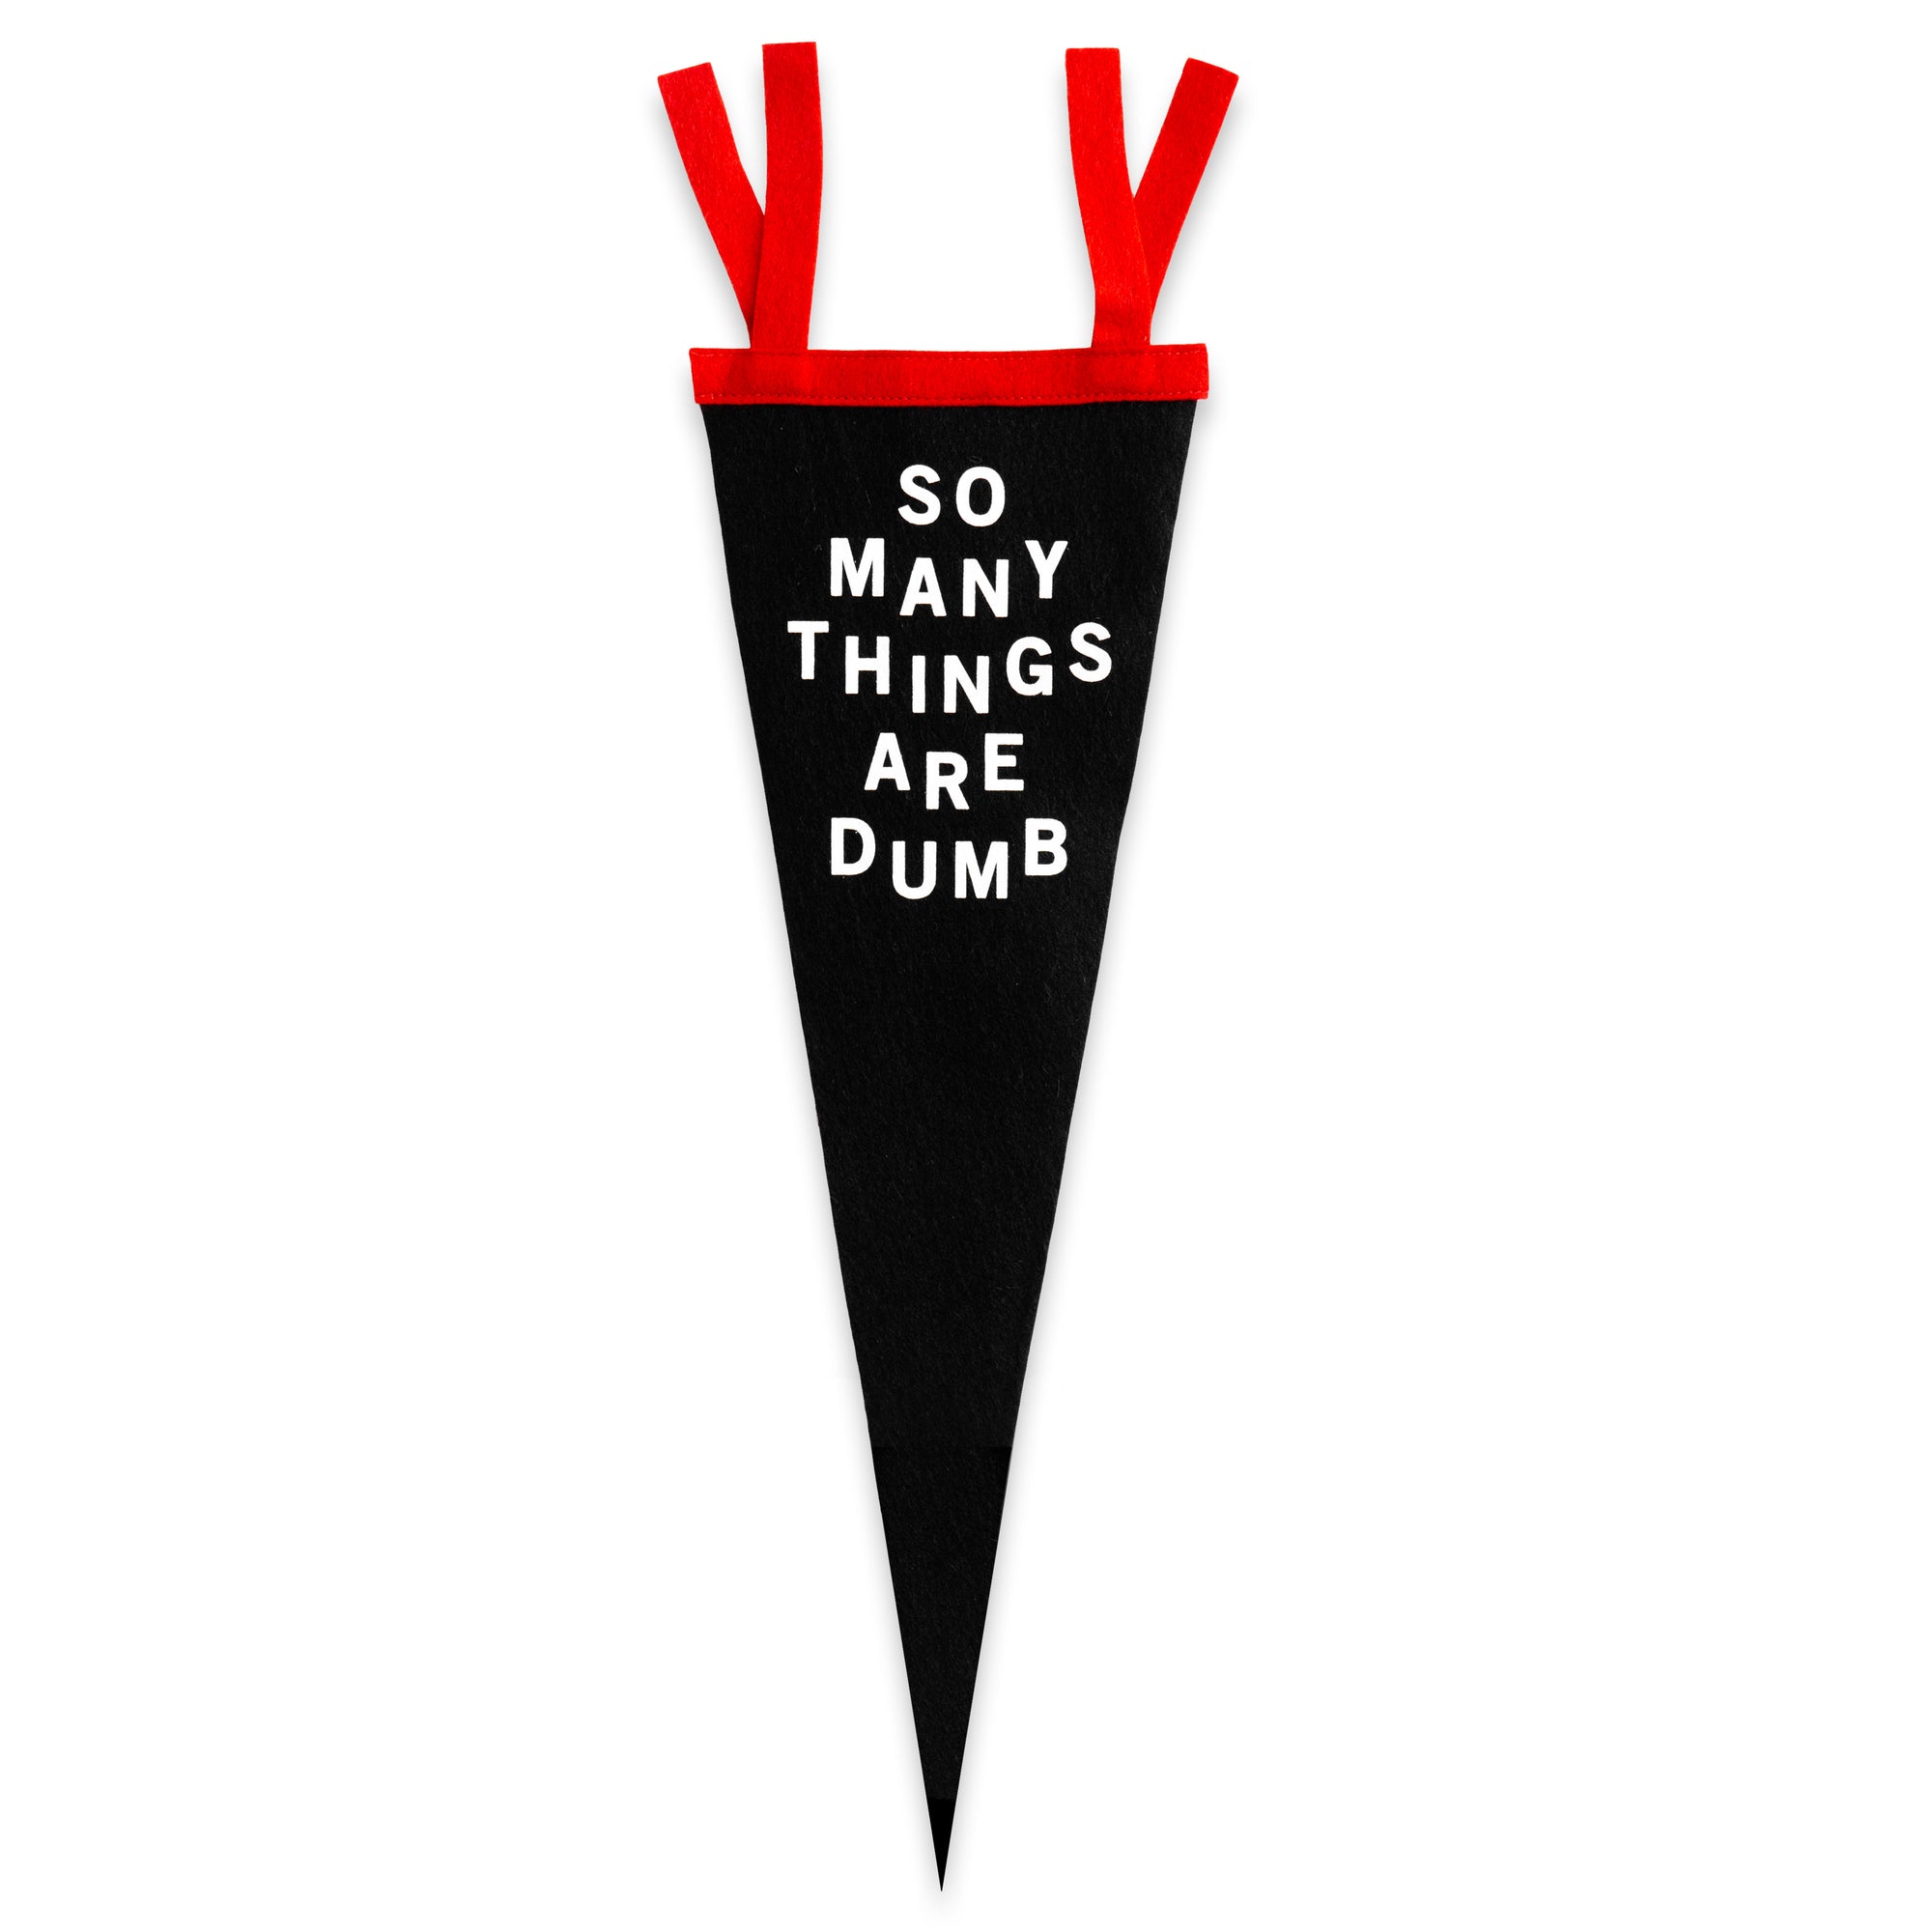 A black pennant with red ties hanging vertically.  The phrase "So Many Things are Dumb" is printed on one side in white.  